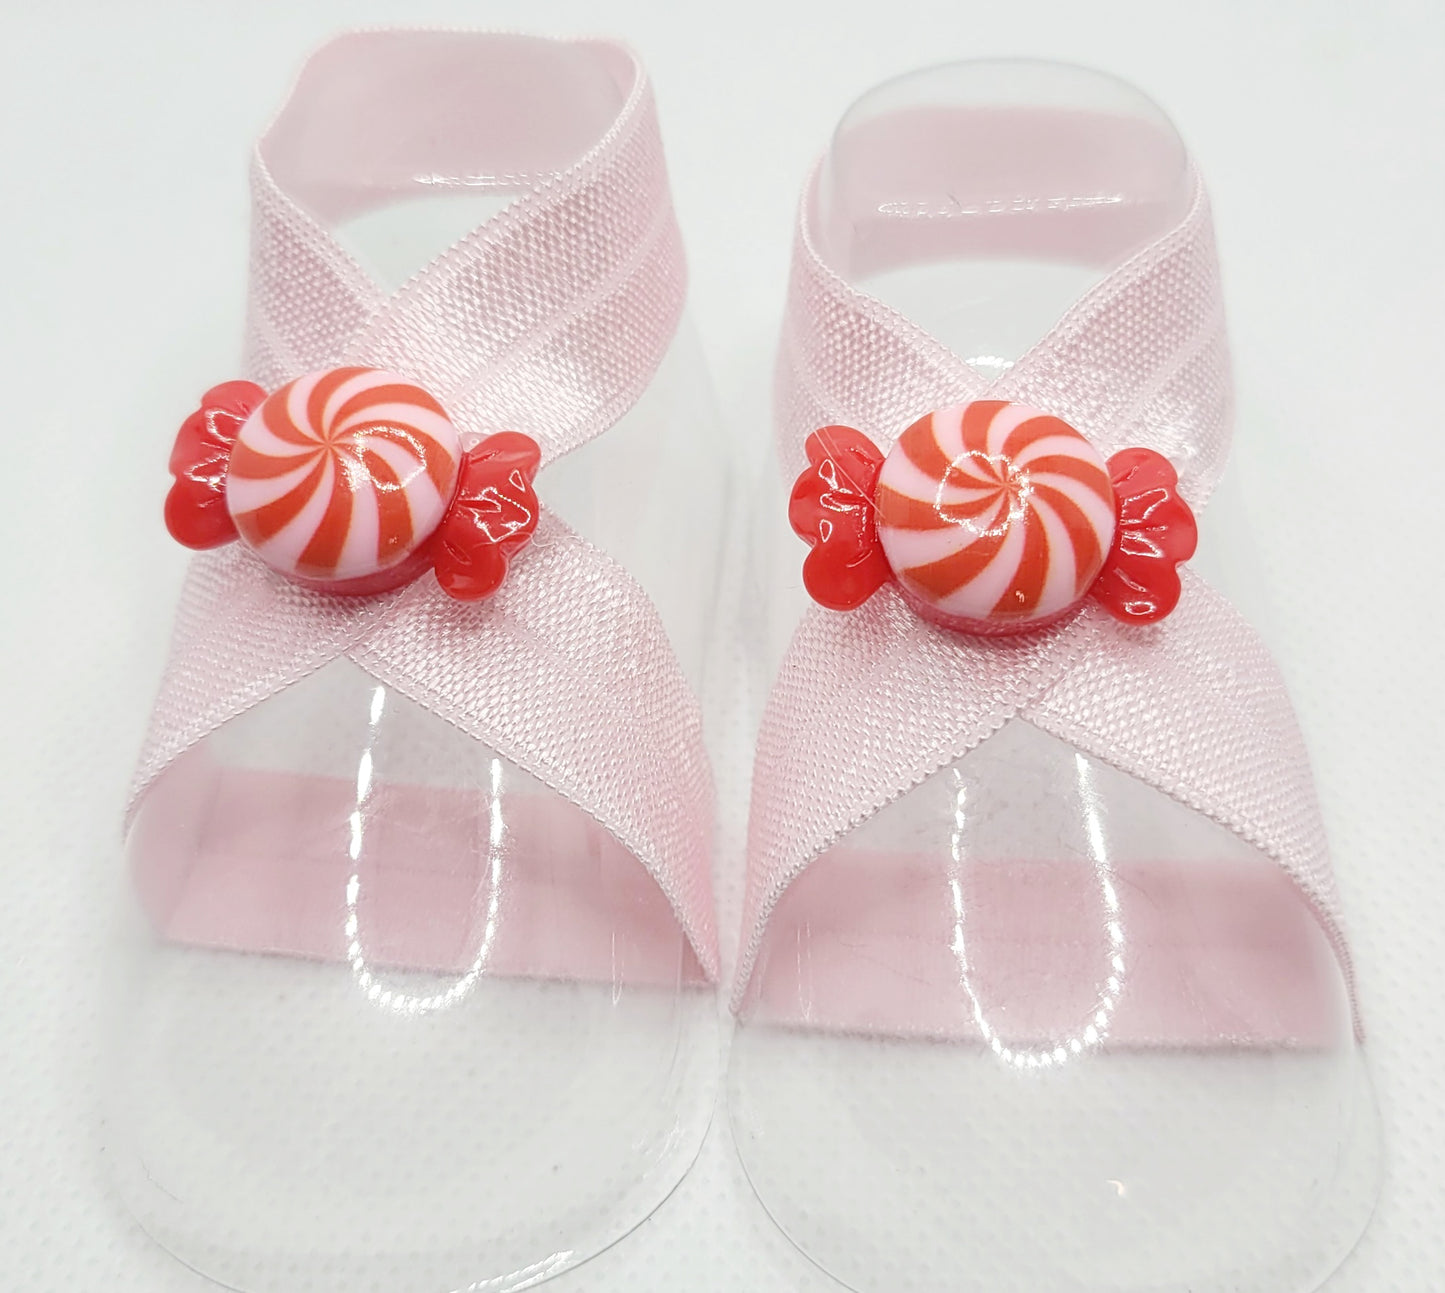 Peppermint Cotton Candy Pink Barefoot Sandals for the Holidays Baby 0-4 months old